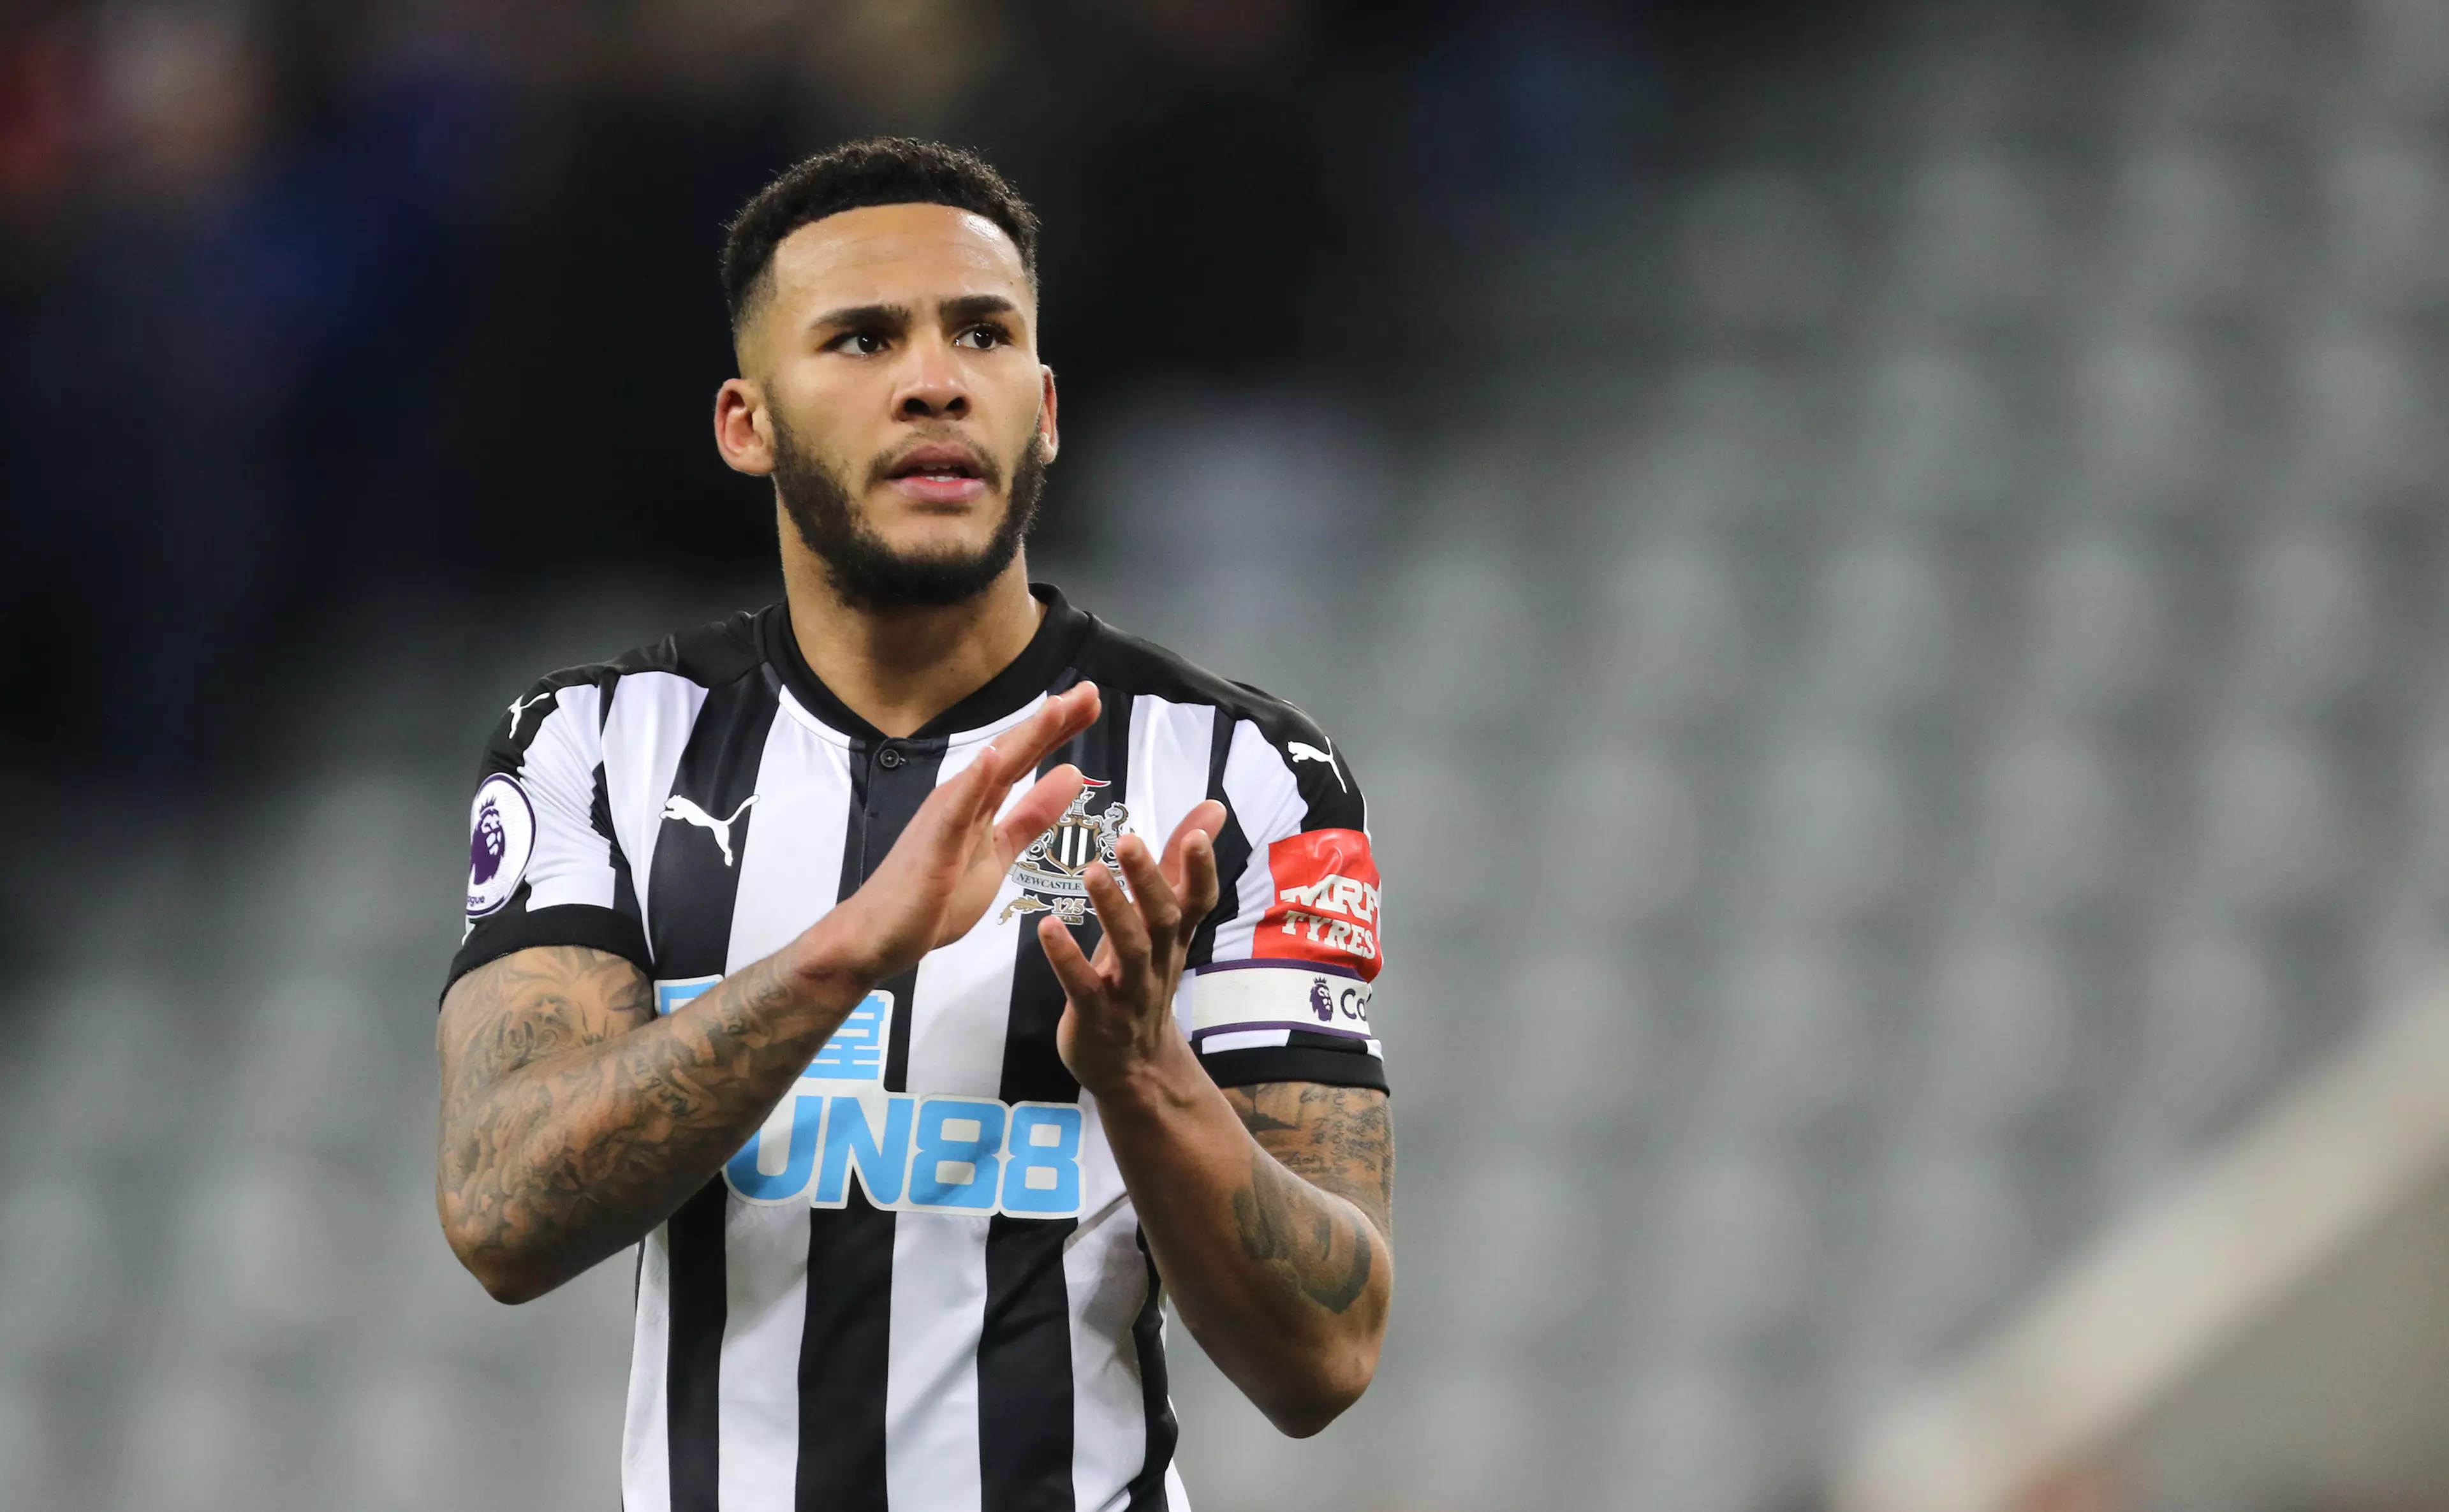 Lascelles in action for Newcastle United. Image: PA